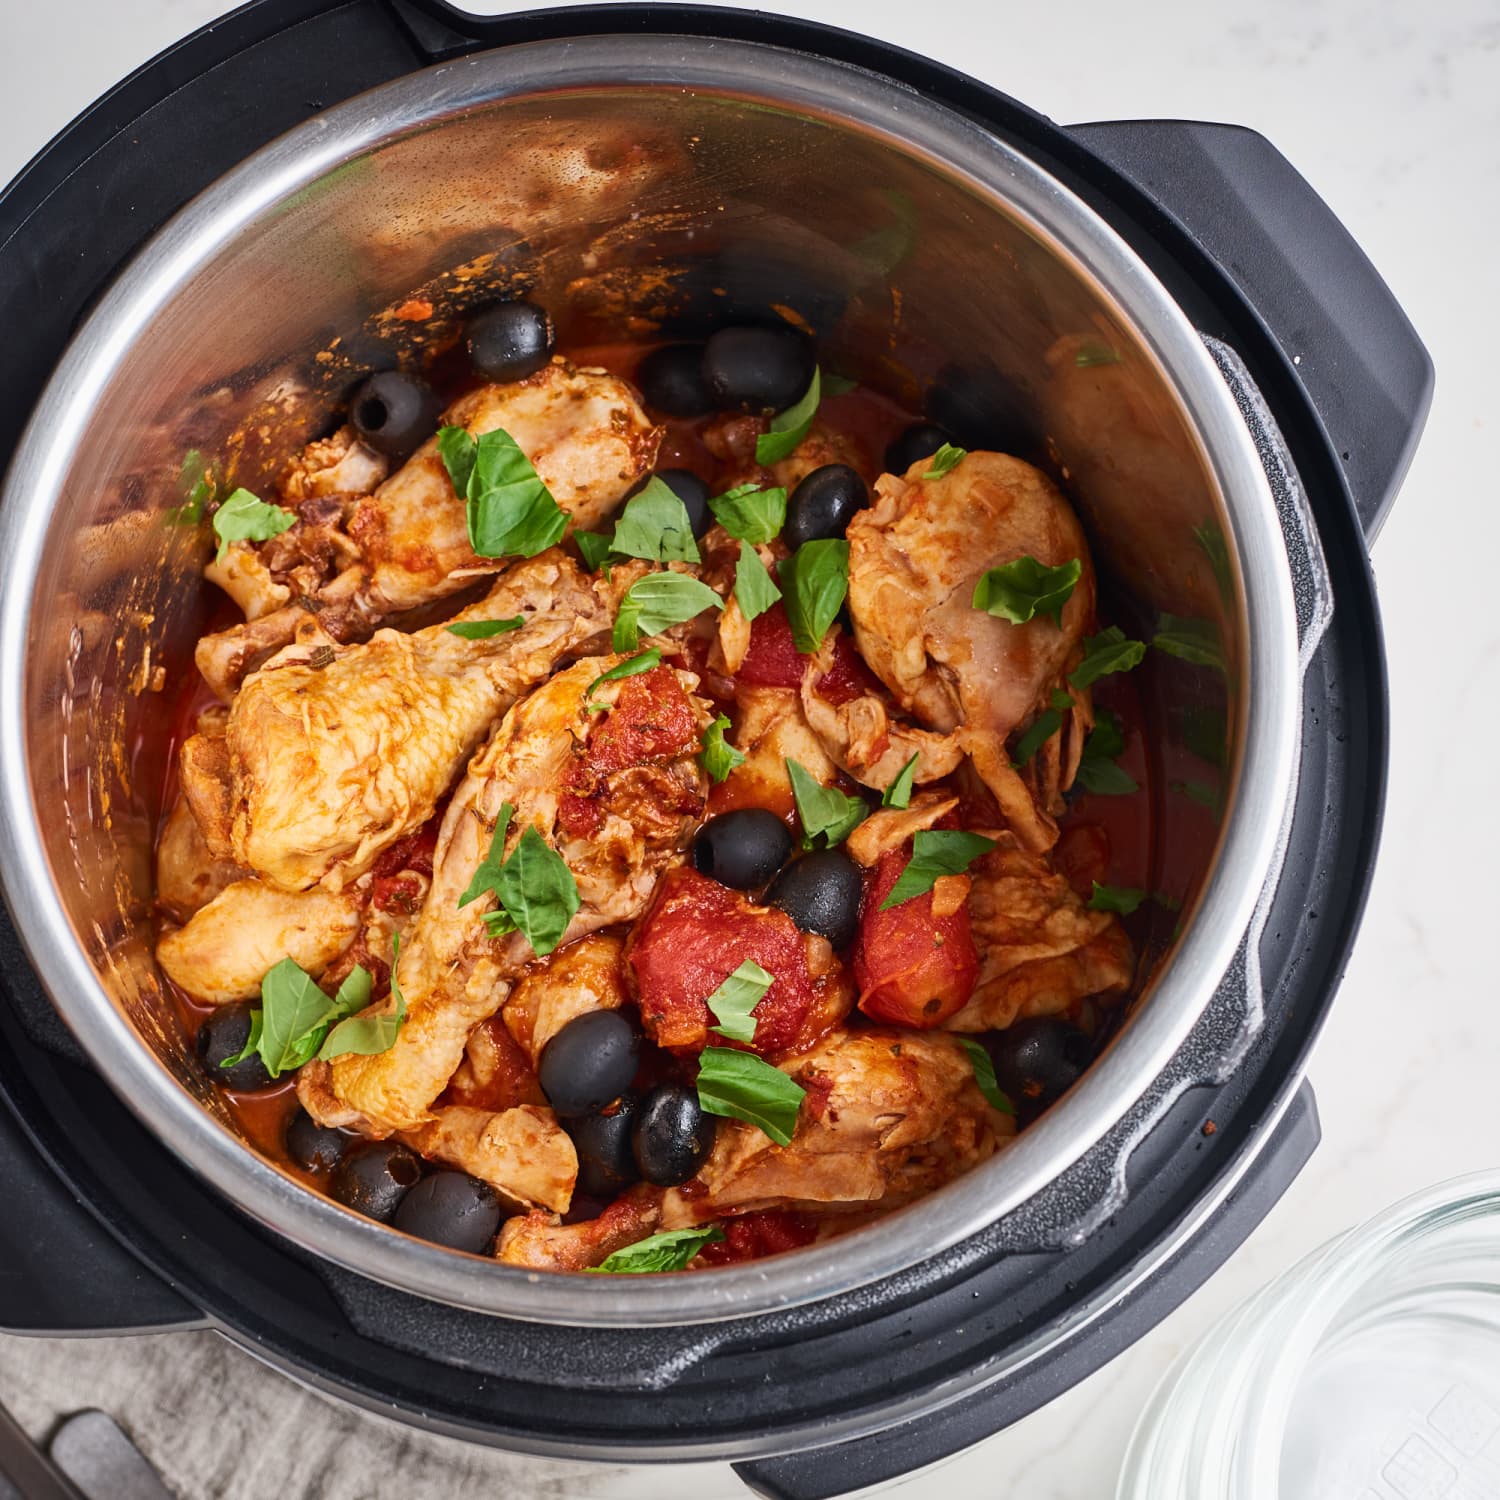 Slow cooker and Instant Pot recipes: How to cook all your pantry items